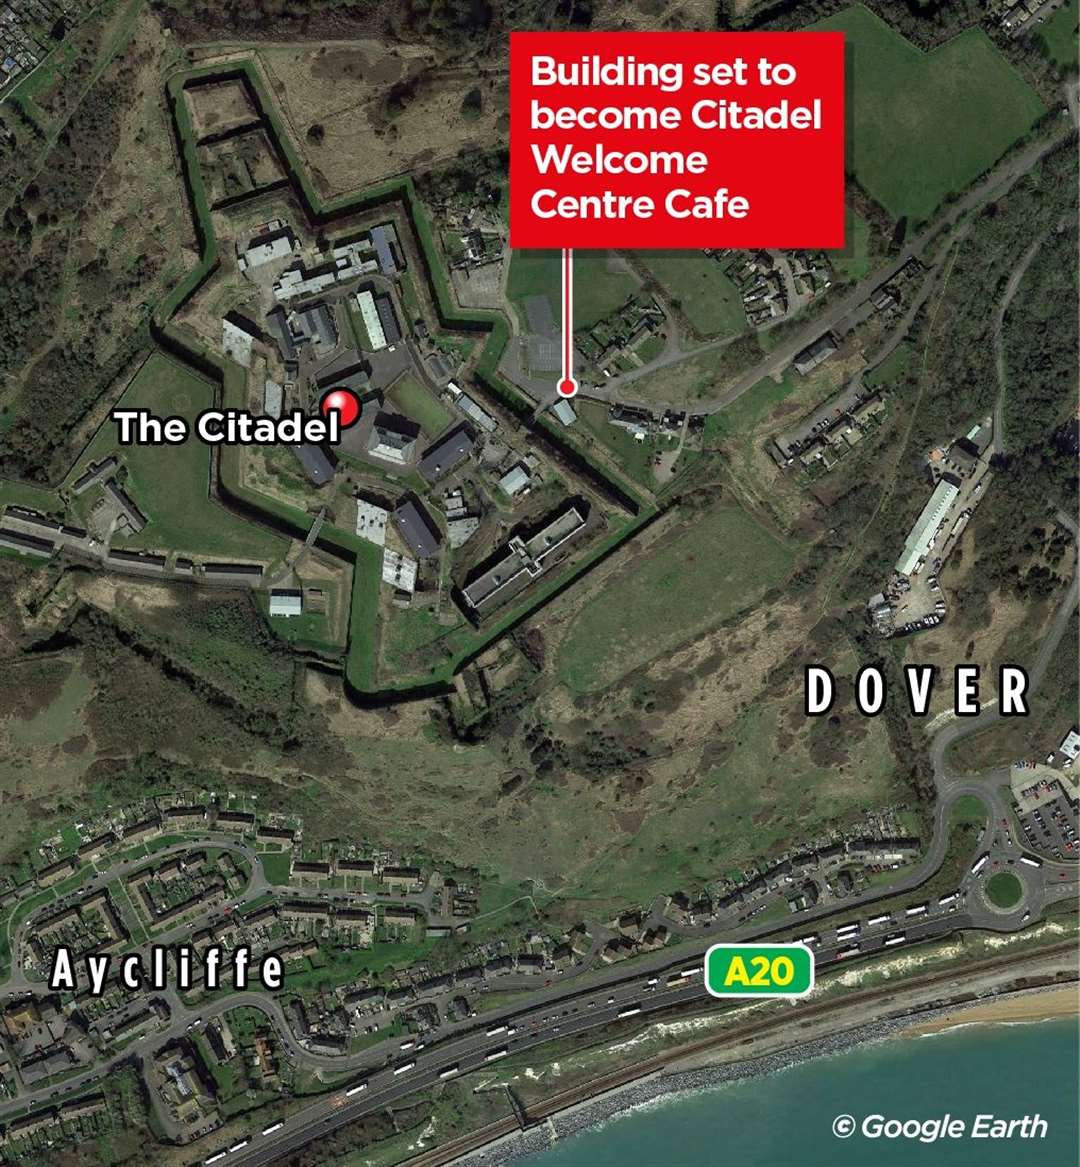 The Citadel Welcome Centre Cafe is planned for a vacant building close to the site entrance